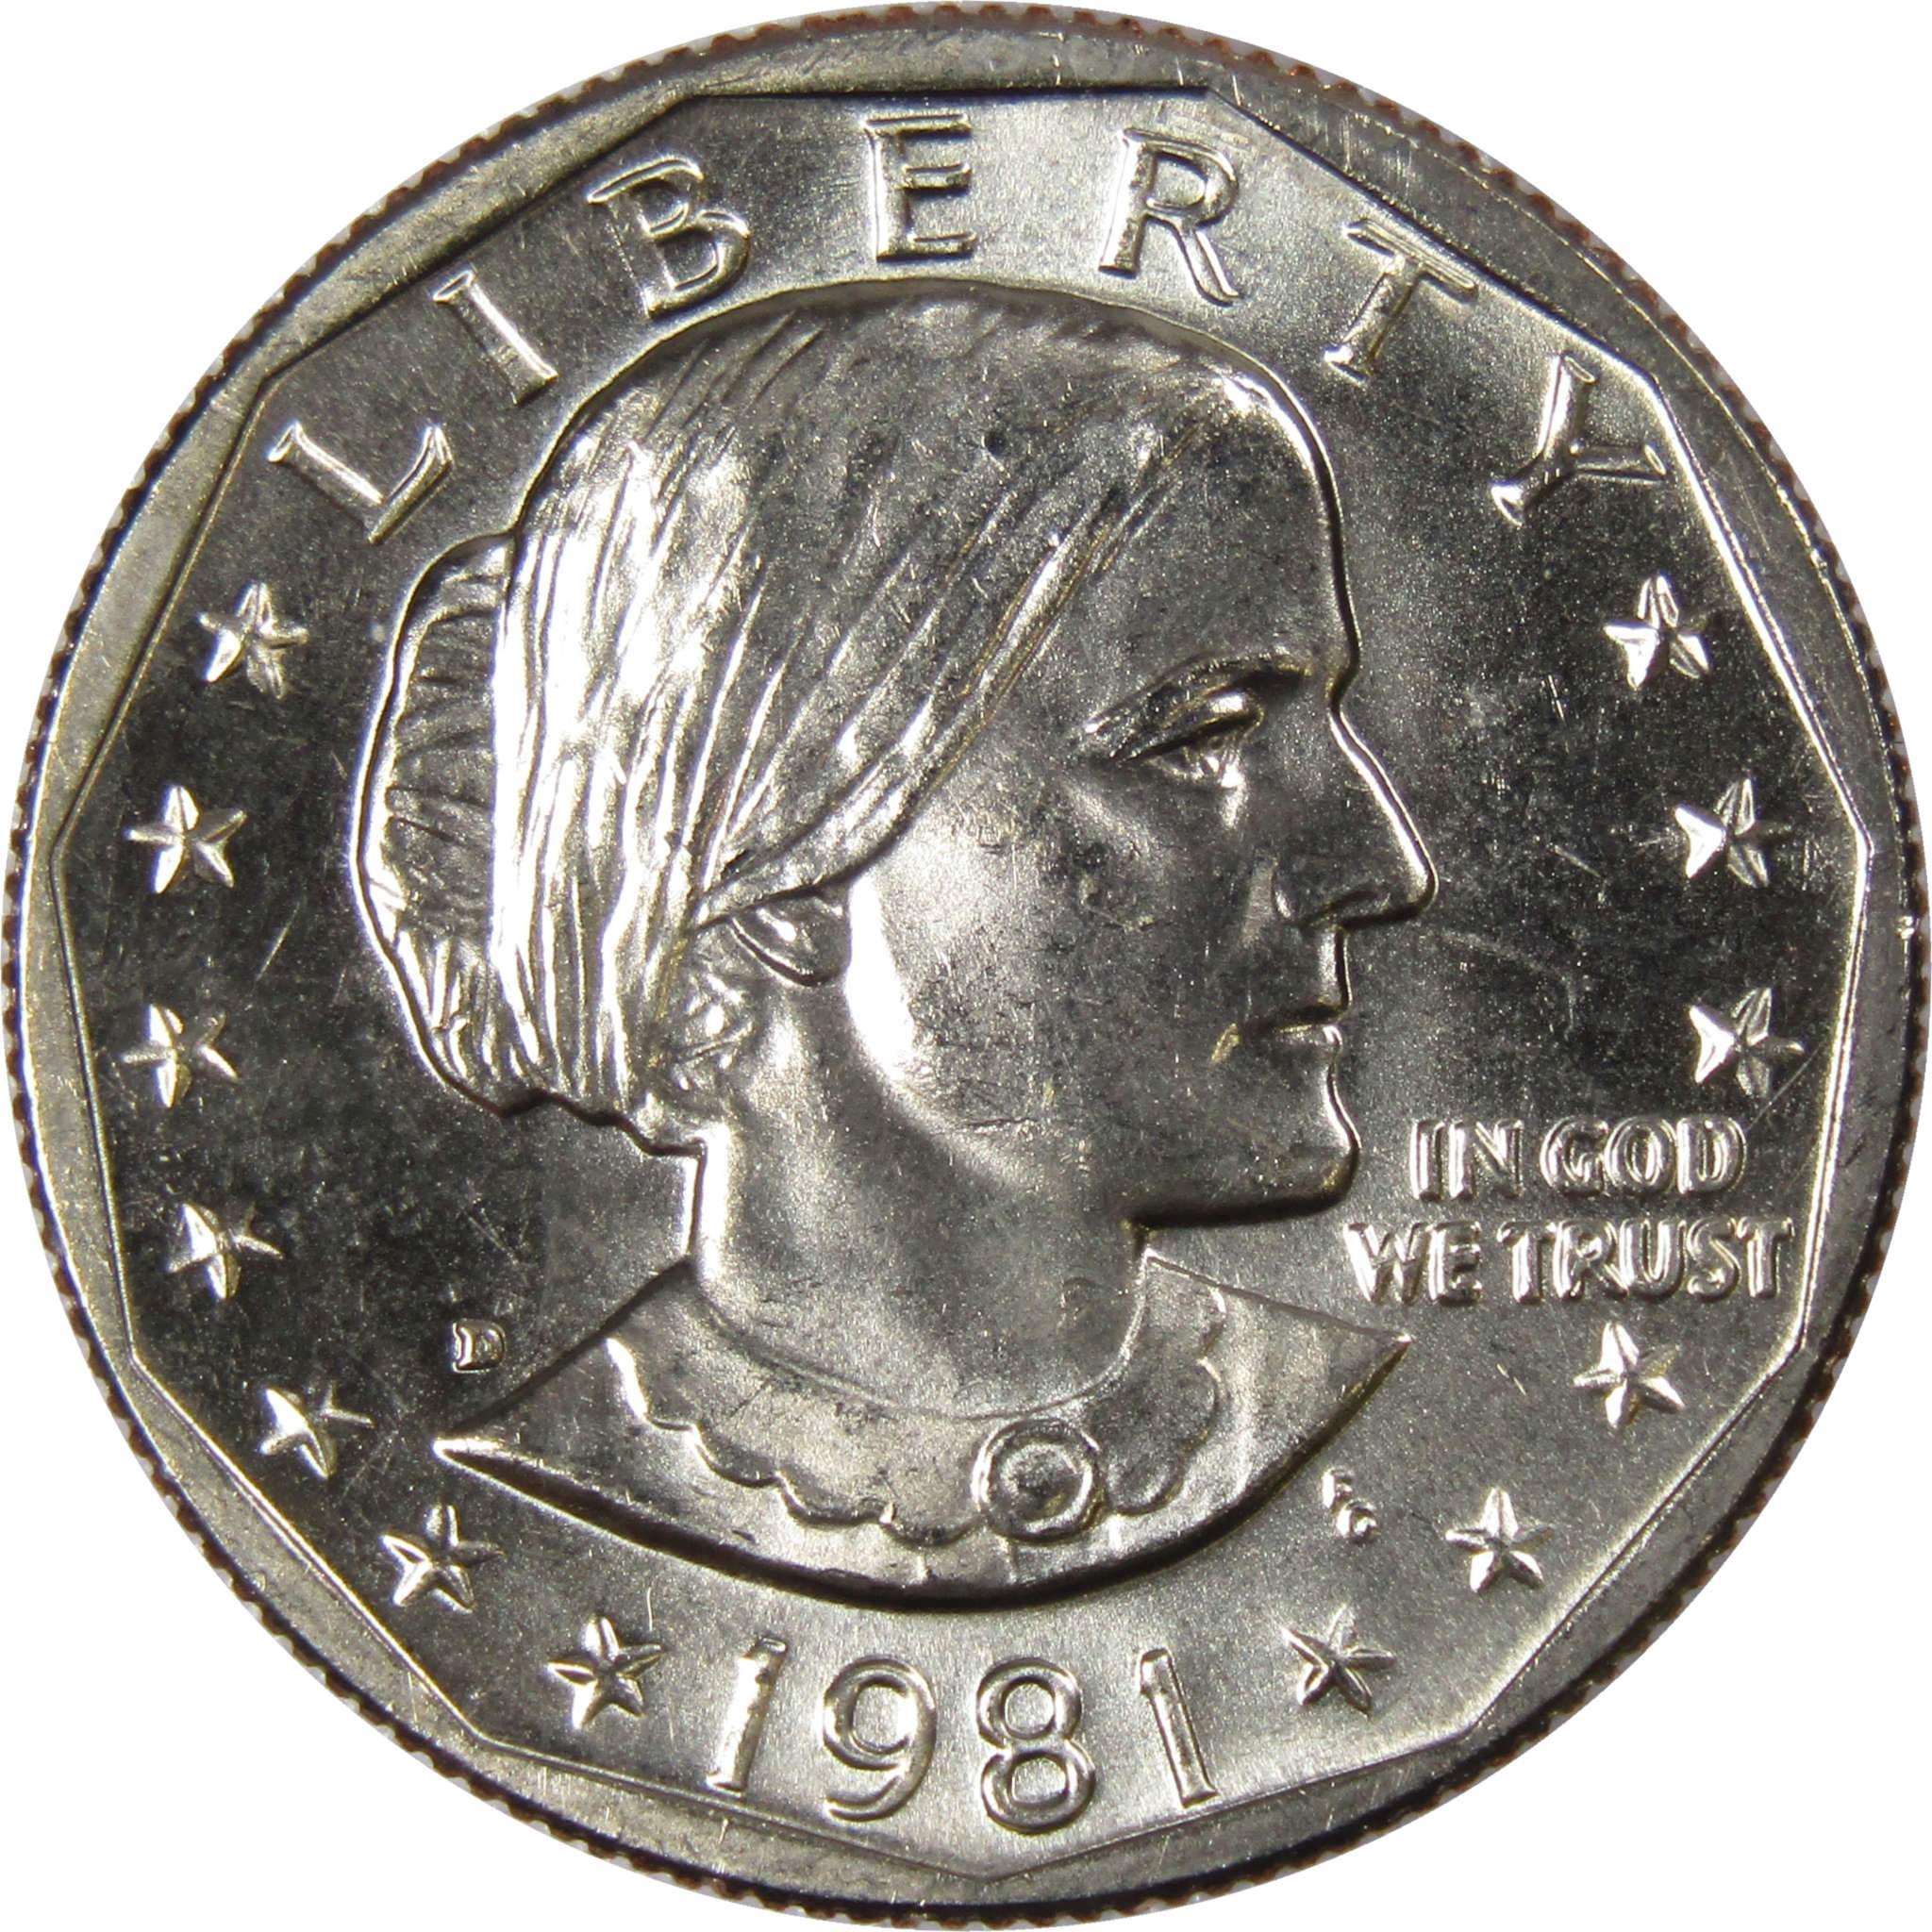 1981 D Susan B Anthony Dollar BU Uncirculated Mint State SBA $1 US Coin